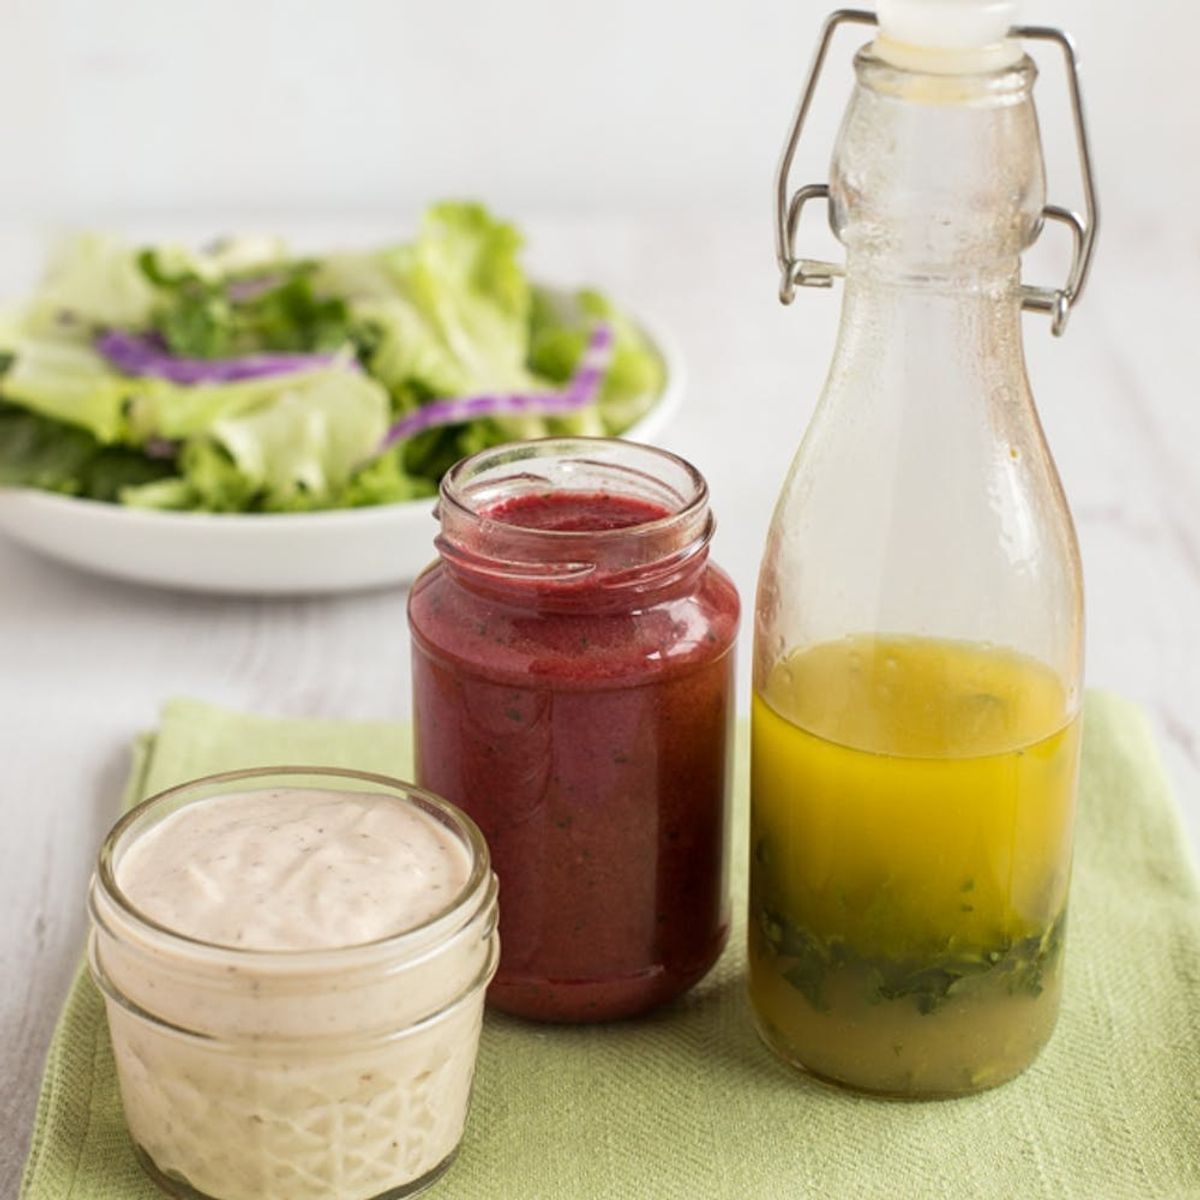 These Three Salad Dressings Will Put Lettuce Back on the Menu!